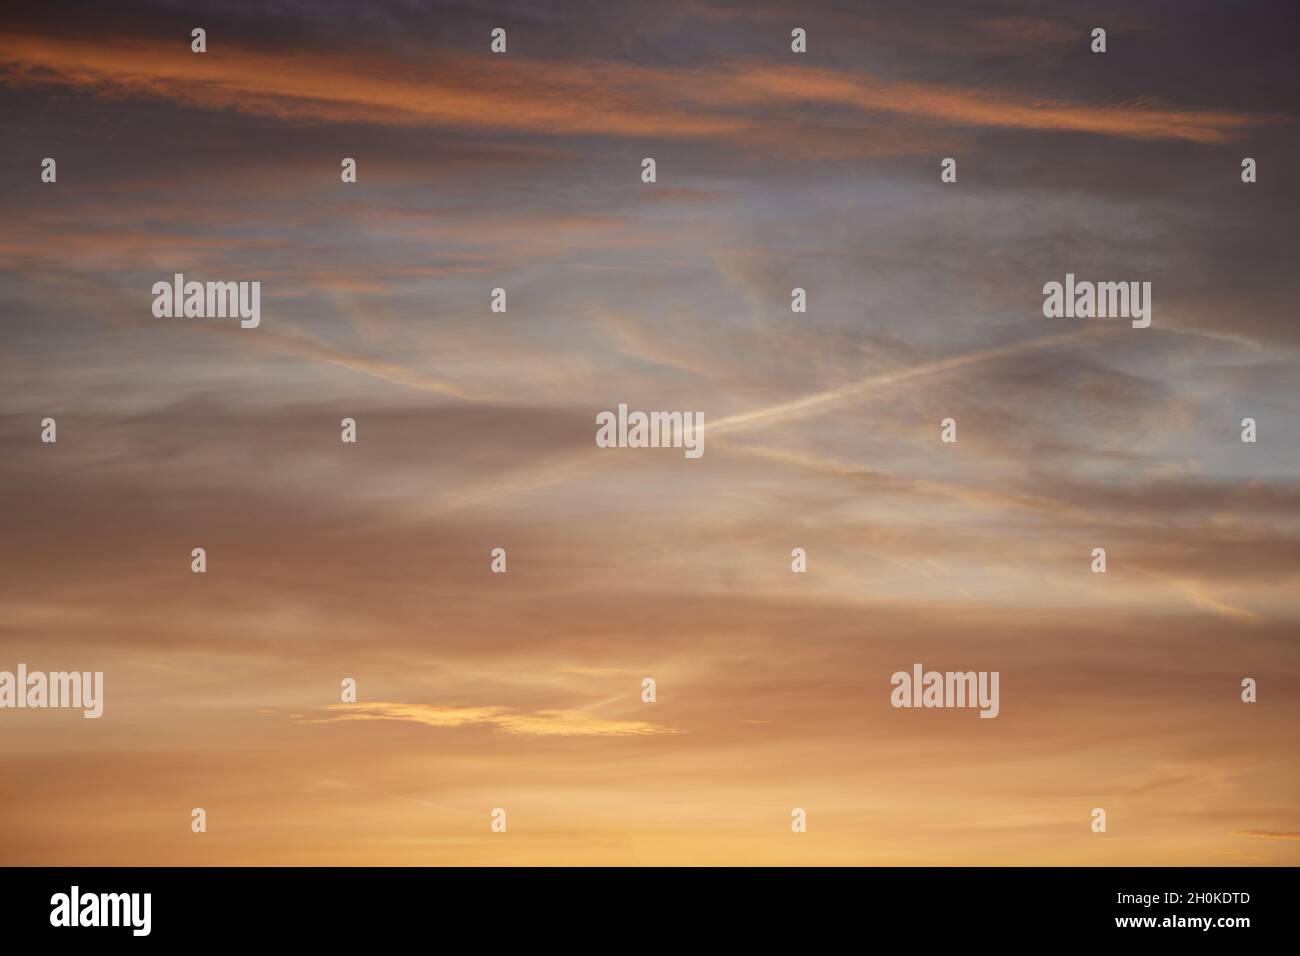 Contrails can be seen creating a cross with diagonal lines in the colourful early morning sky. Stock Photo